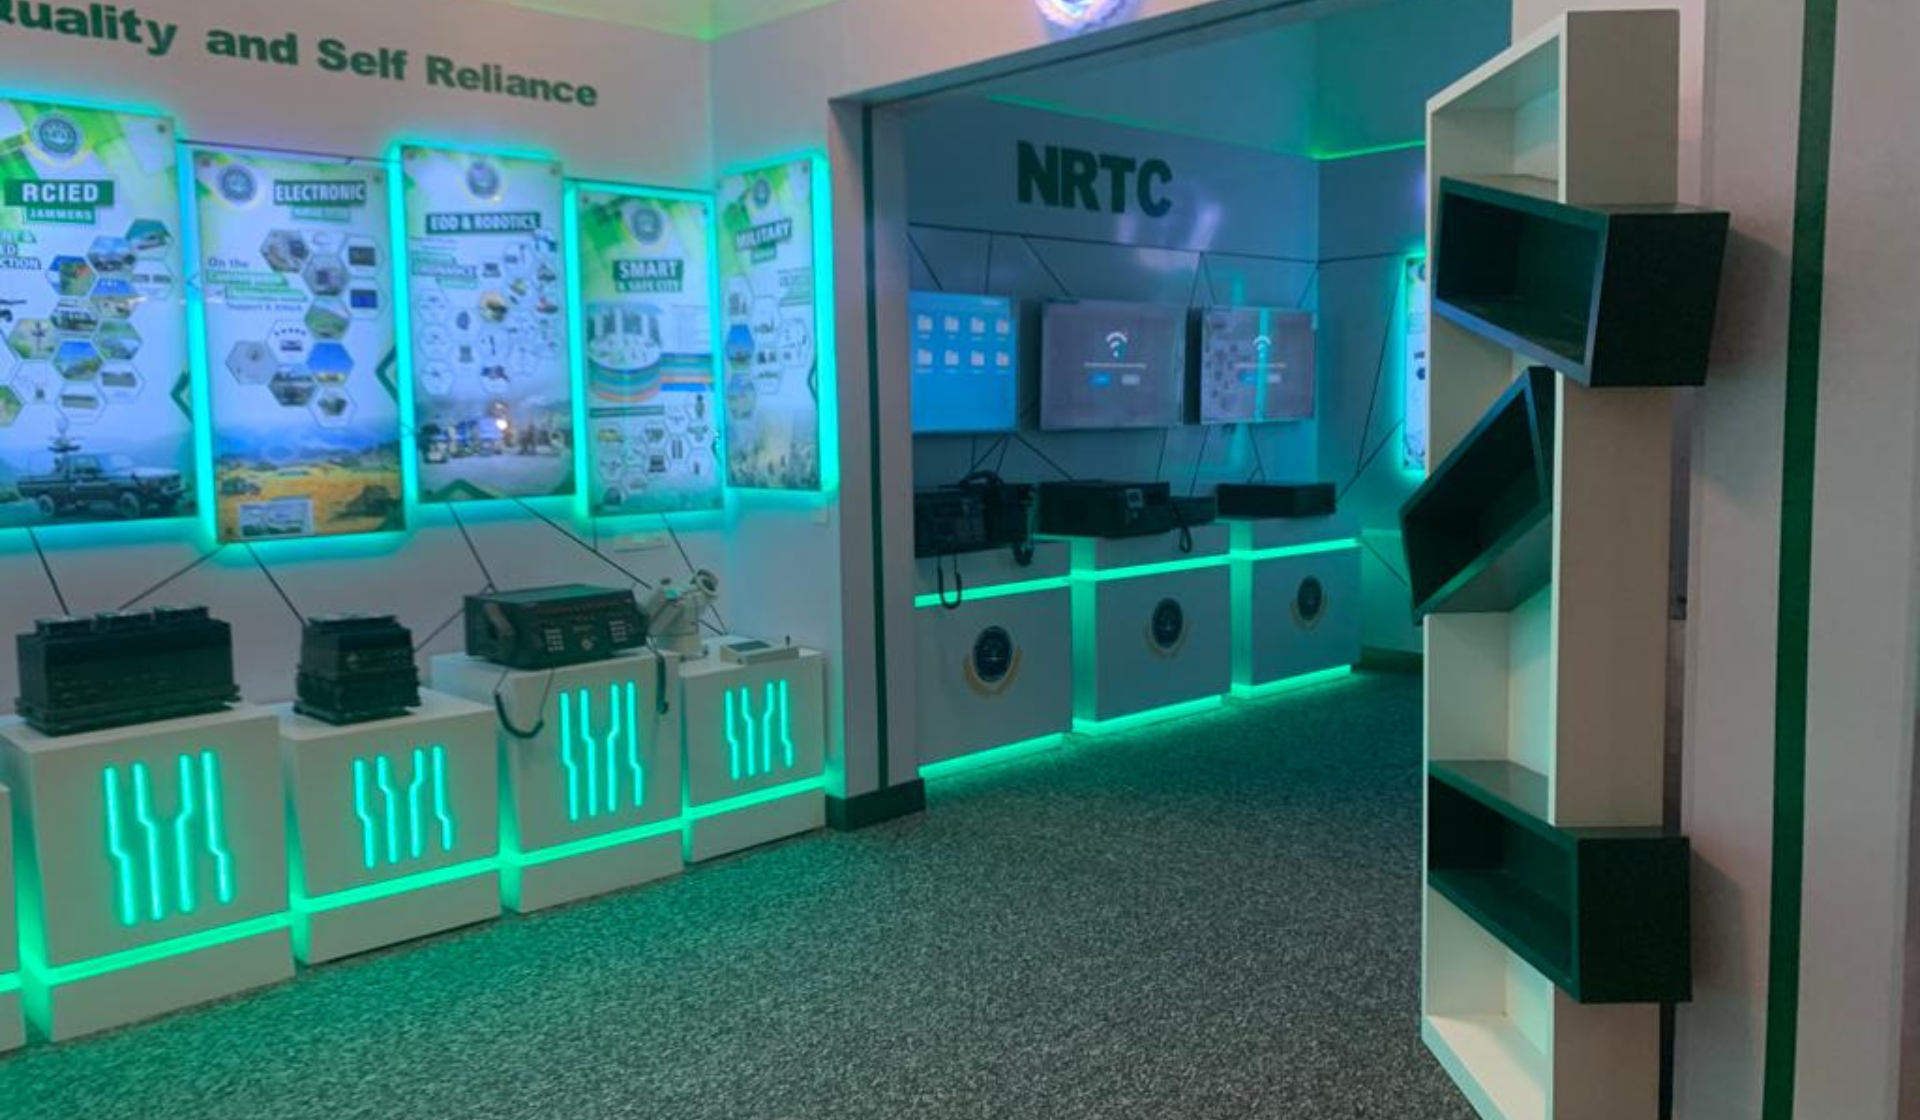 NRTC Display at the DEPO Display Center in Islamabad image 04